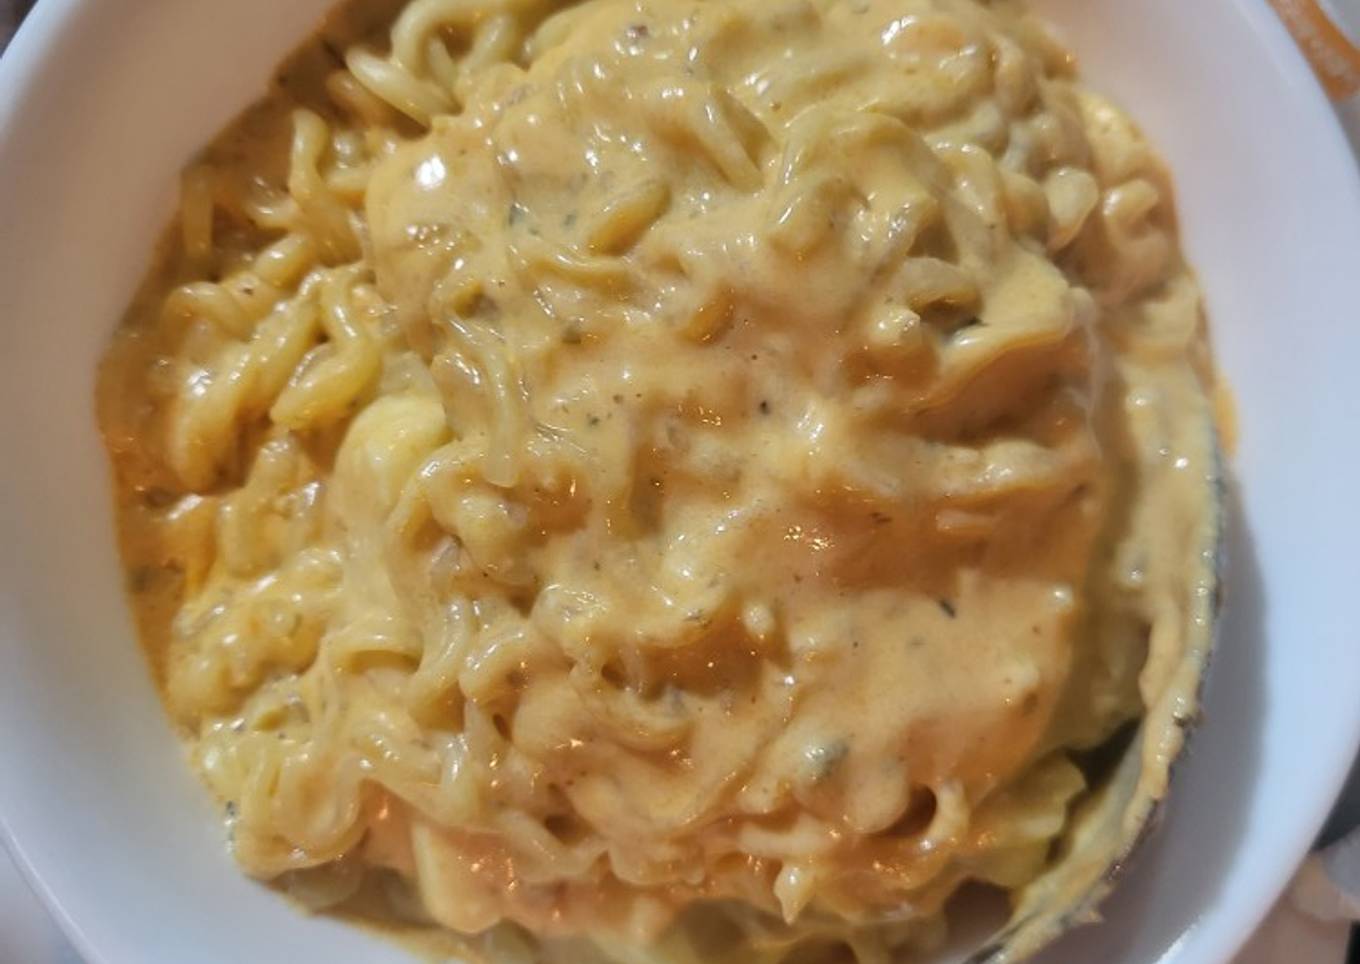 Samyang Chicken Cheese Noodle (Less Spicy Carbonara)